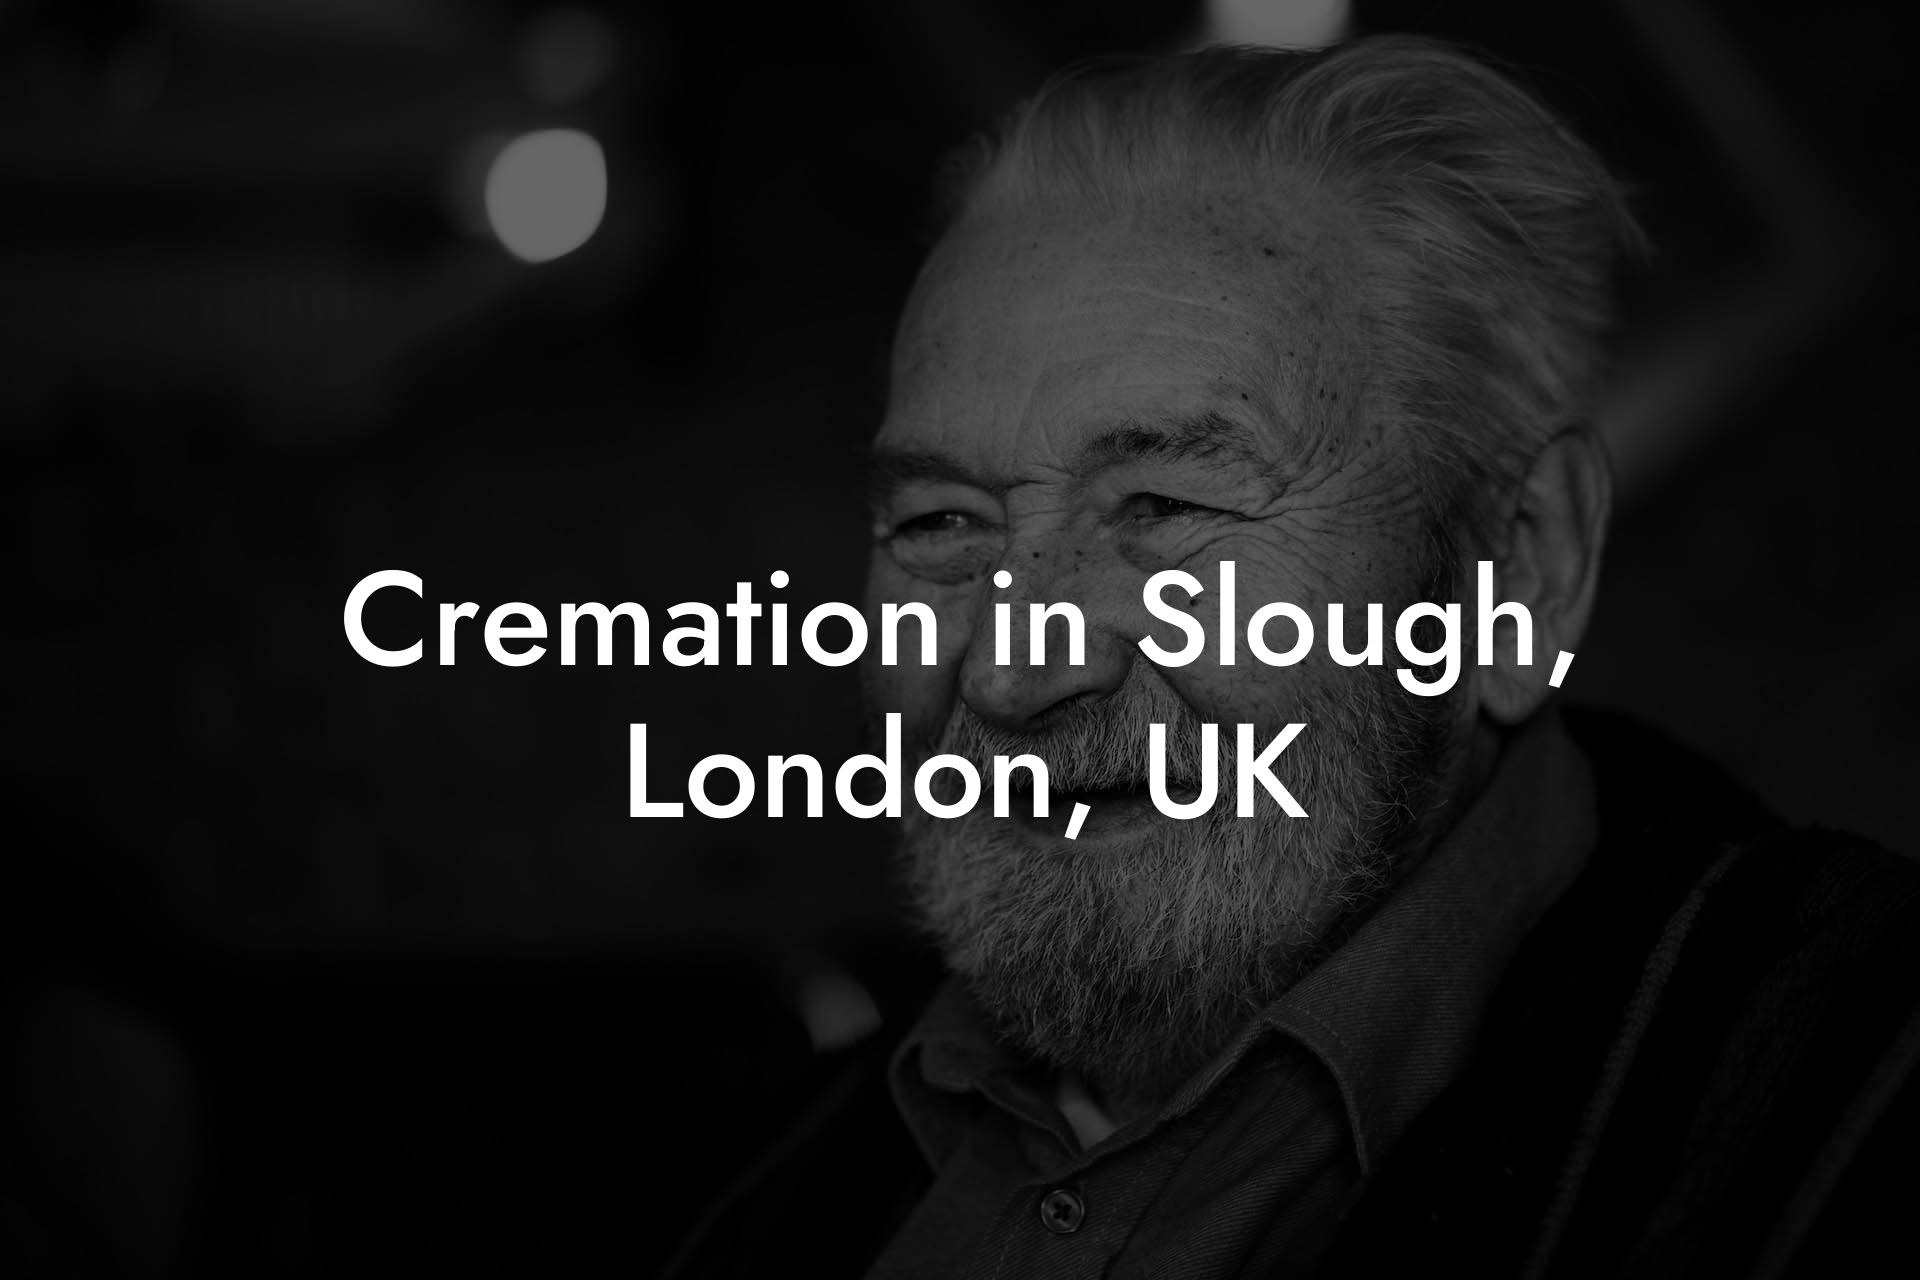 Cremation in Slough, London, UK